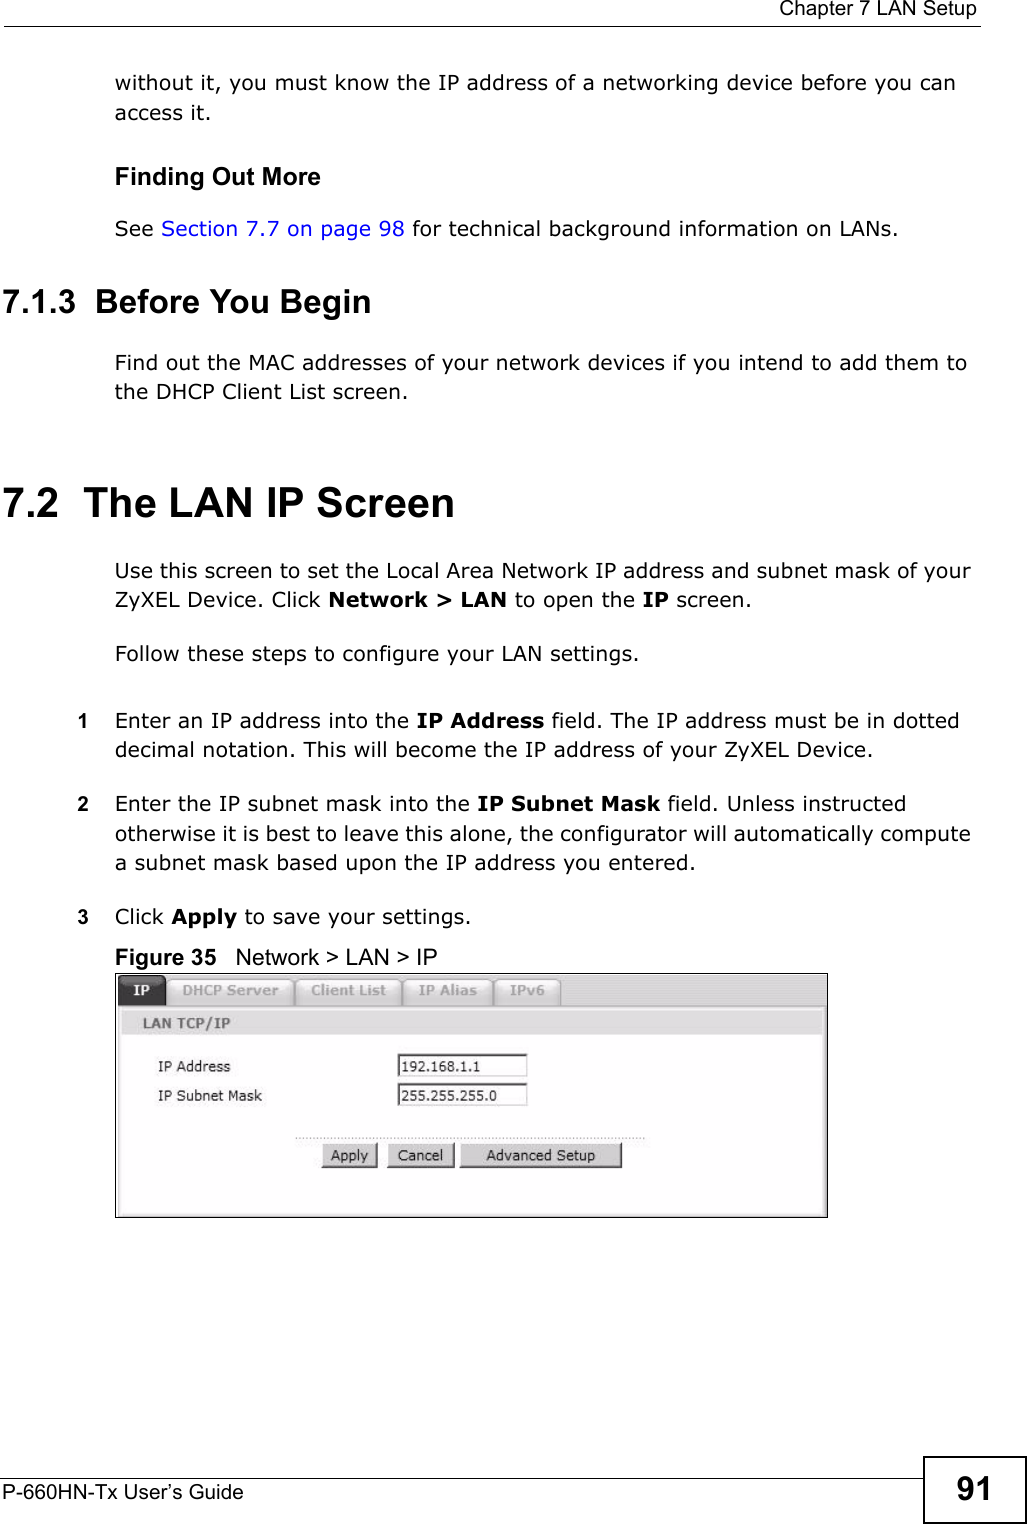  Chapter 7 LAN SetupP-660HN-Tx User’s Guide 91without it, you must know the IP address of a networking device before you can access it.Finding Out MoreSee Section 7.7 on page 98 for technical background information on LANs.7.1.3  Before You BeginFind out the MAC addresses of your network devices if you intend to add them to the DHCP Client List screen.7.2  The LAN IP ScreenUse this screen to set the Local Area Network IP address and subnet mask of your ZyXEL Device. Click Network &gt; LAN to open the IP screen. Follow these steps to configure your LAN settings.1Enter an IP address into the IP Address field. The IP address must be in dotted decimal notation. This will become the IP address of your ZyXEL Device.2Enter the IP subnet mask into the IP Subnet Mask field. Unless instructed otherwise it is best to leave this alone, the configurator will automatically compute a subnet mask based upon the IP address you entered.3Click Apply to save your settings.Figure 35   Network &gt; LAN &gt; IP